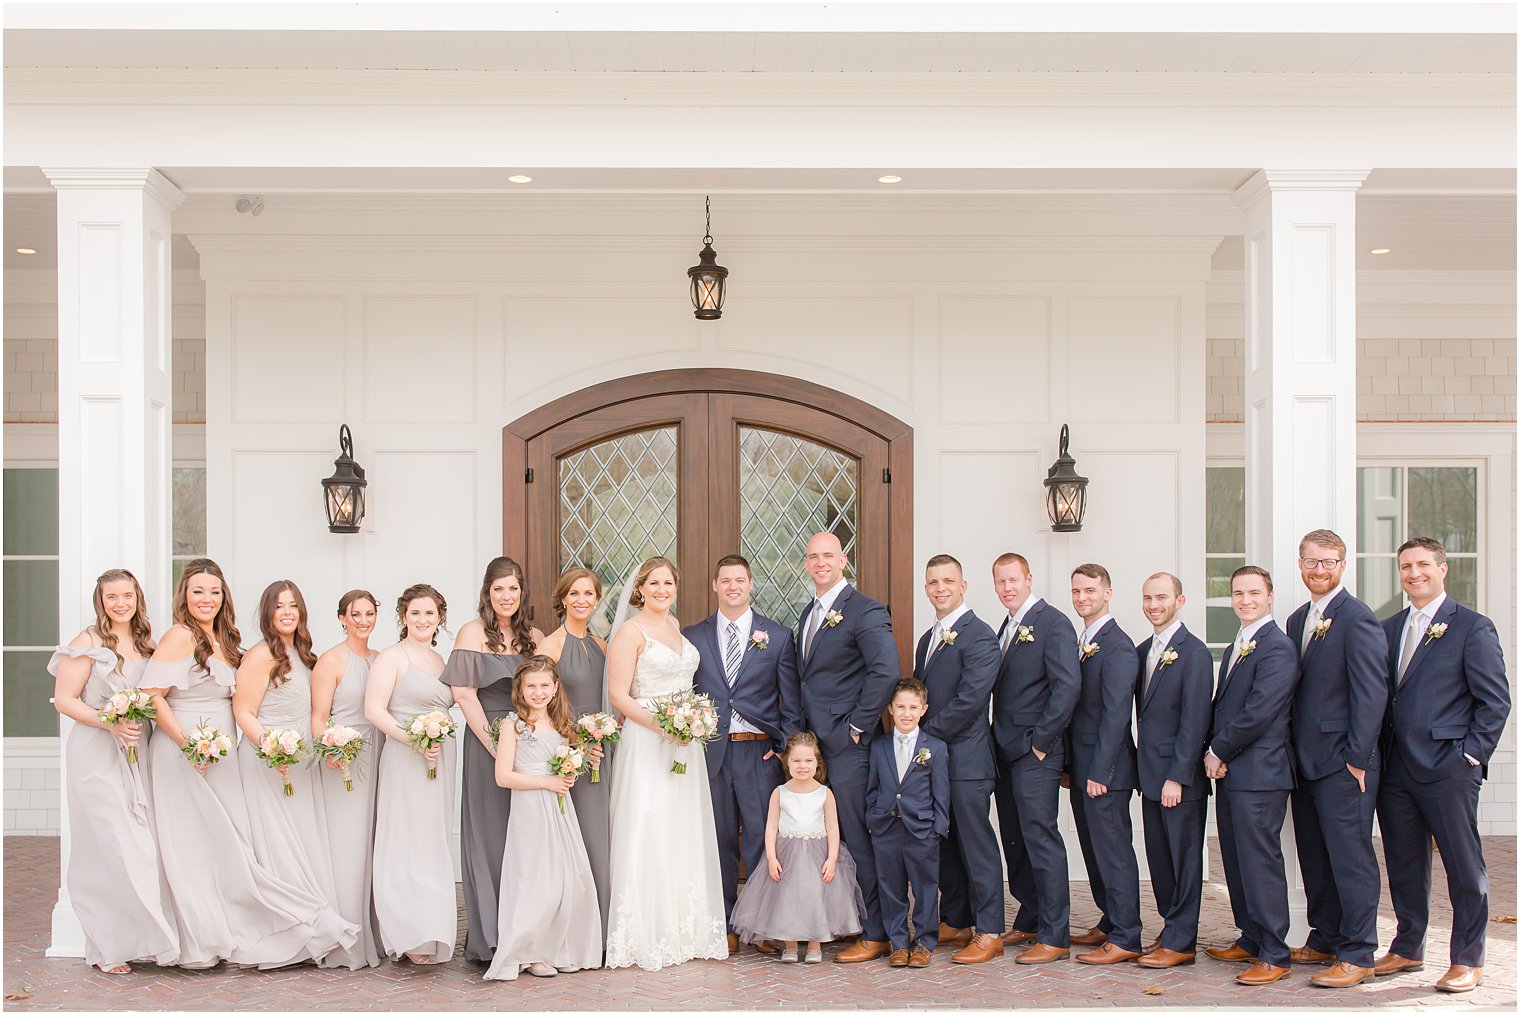 Bridal party photo at The Mill Lakeside Manor in Spring Lake, NJ